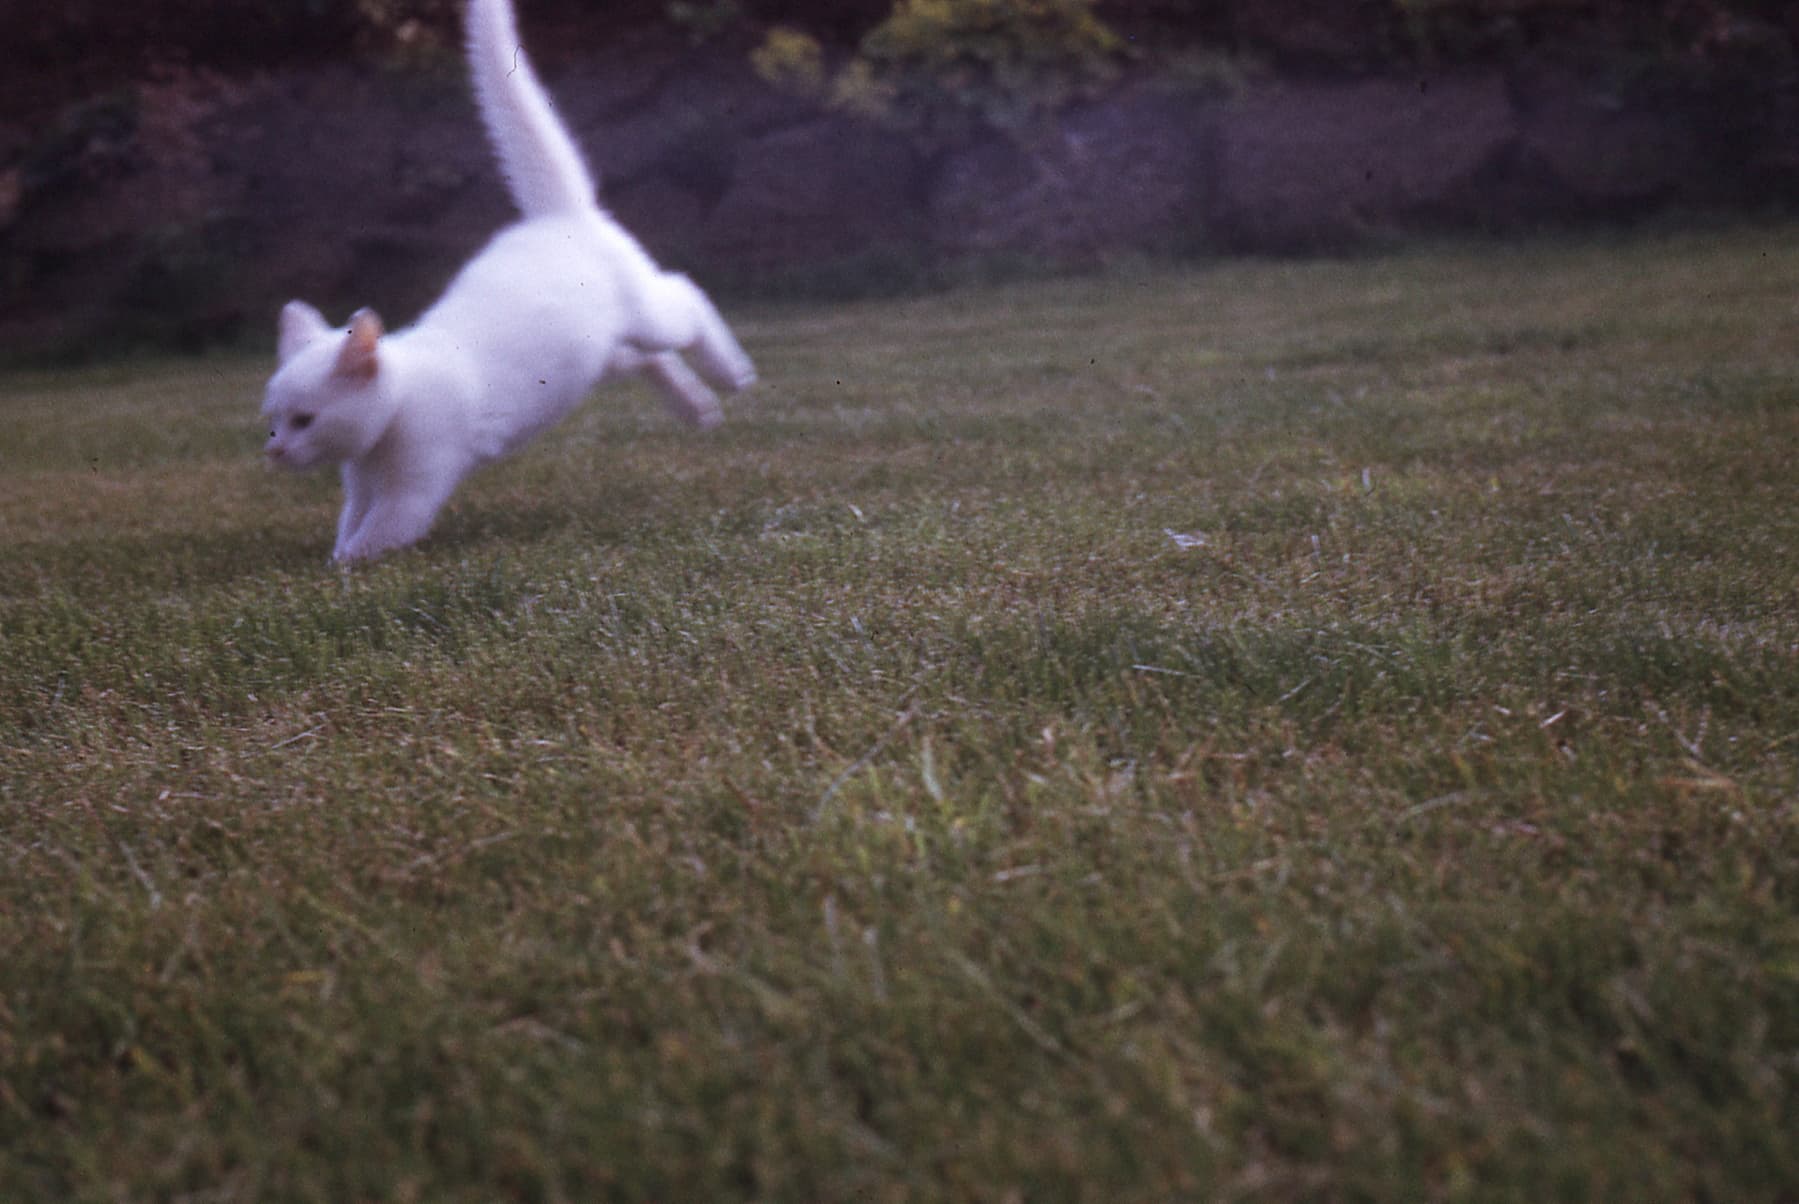 That same white kitten appears as a motion blur as it pounces on something on a lawn